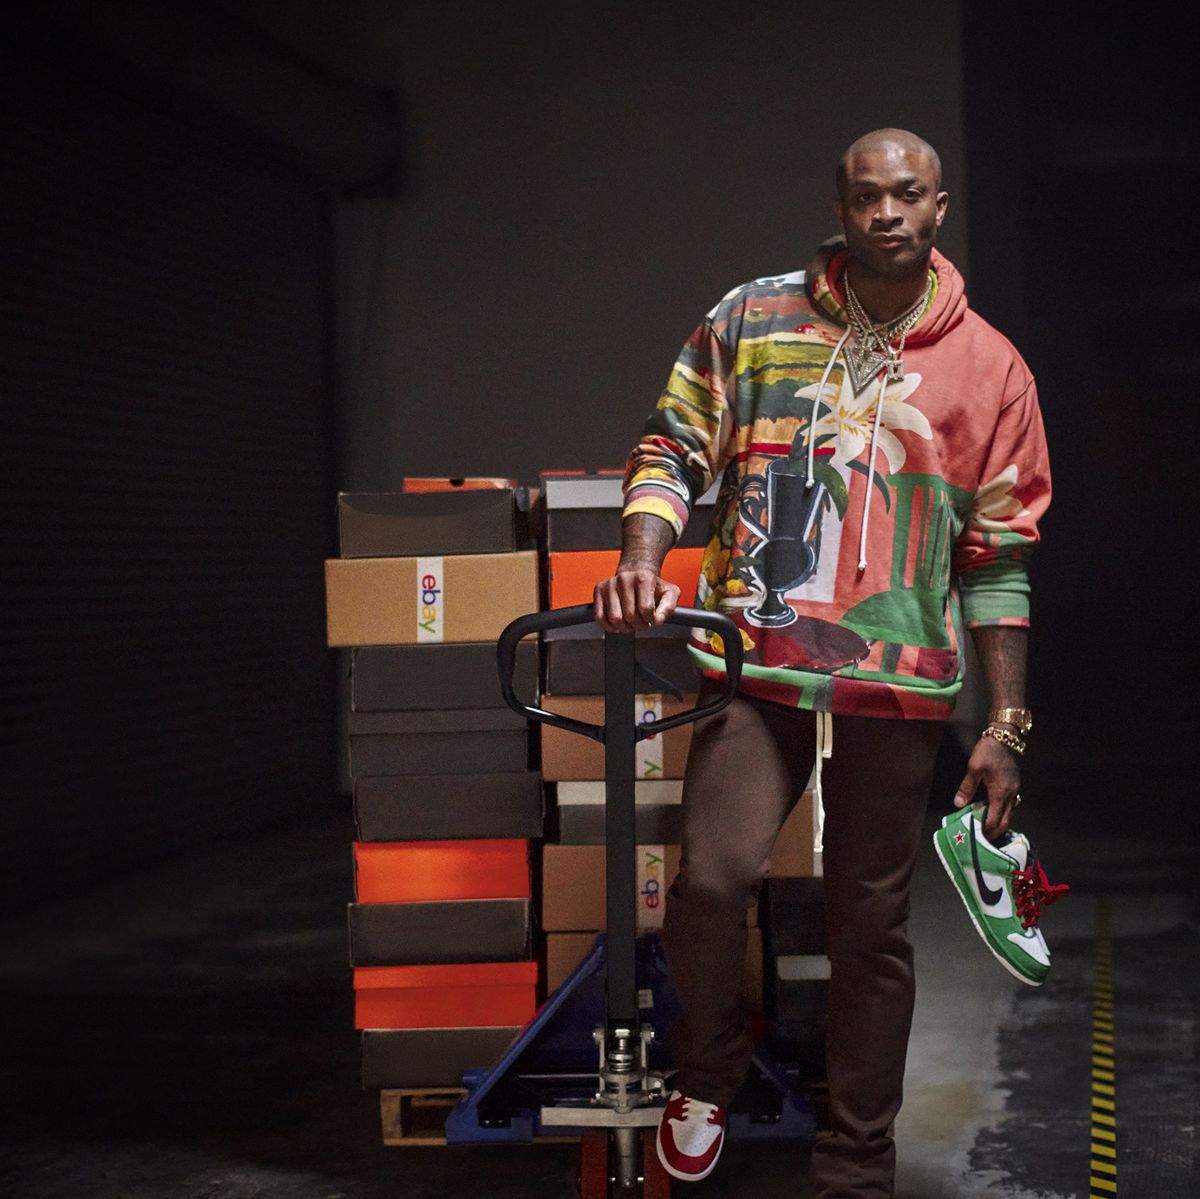 P.J. Tucker brought 110 pairs of sneakers to the bubble - The Dream Shake